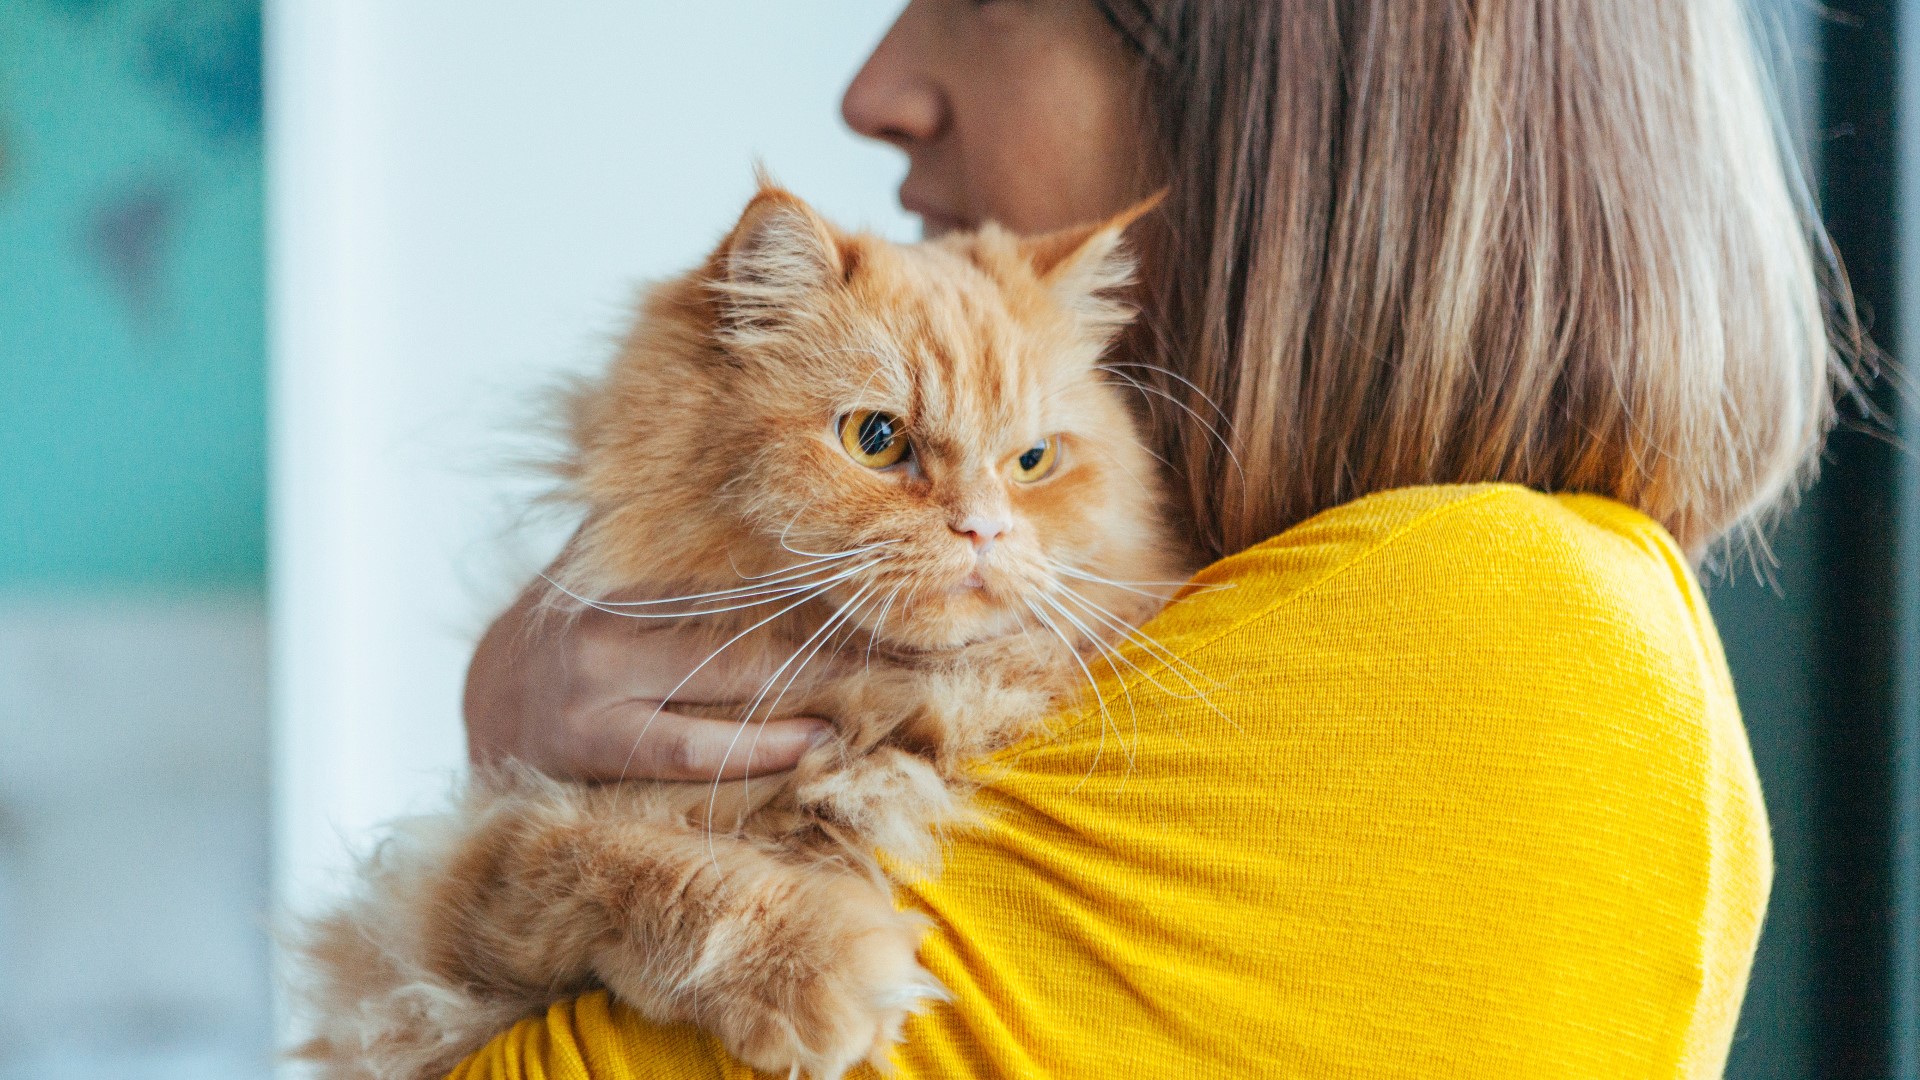 The adoption fee for adult cats is usually $75, so if you've been considering welcoming a new furry friend into your home, now may be the perfect time.